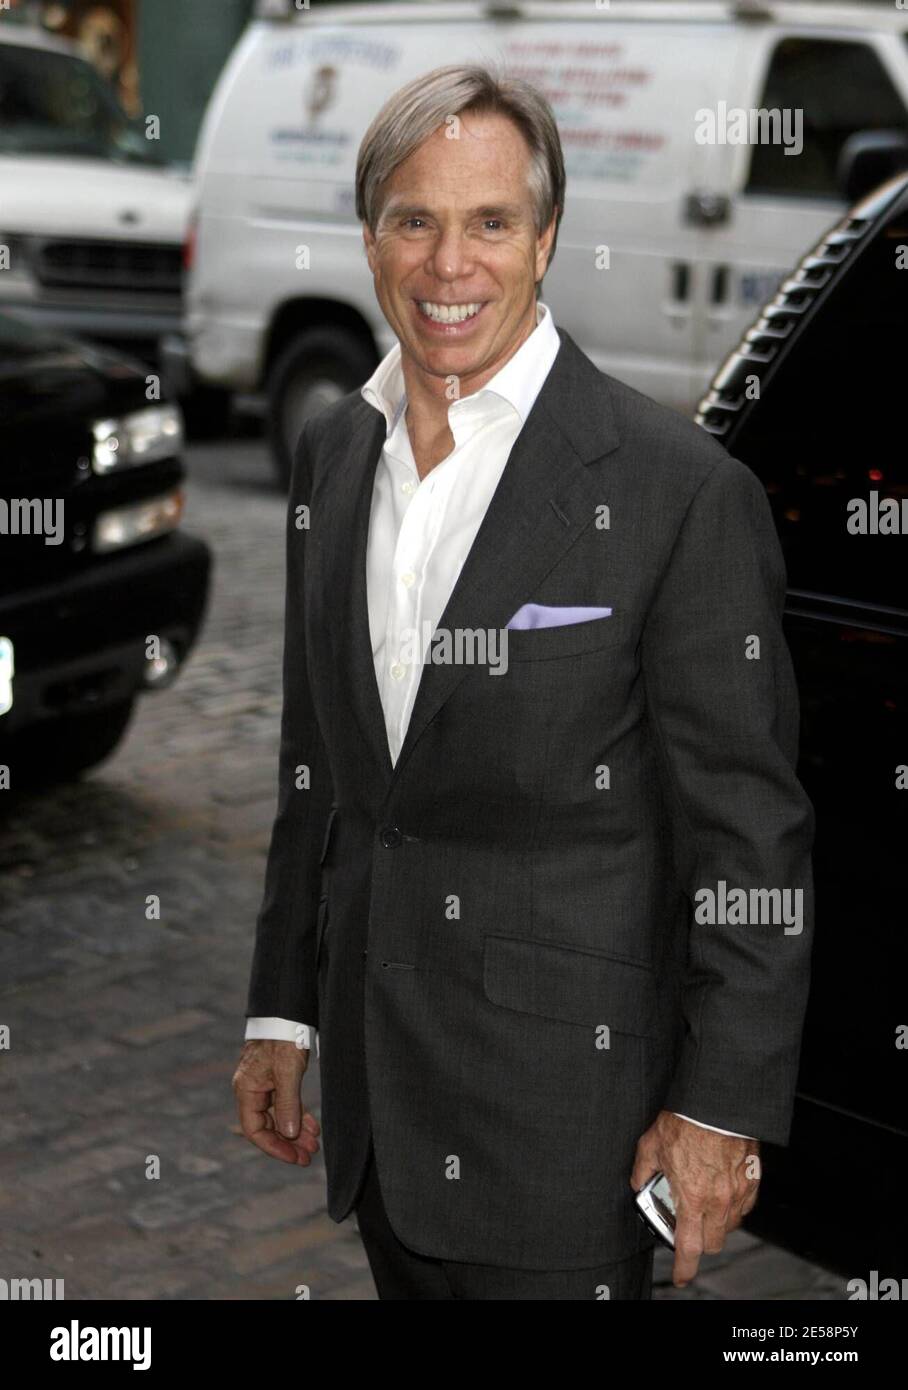 Mania dress up Manhattan Tommy Hilfiger and son Rich, who is co-ceo of Young Rich and Famous  Entertainment, make their way back into a hotel in Soho, NY. 10/4/07.  [[faa]] Stock Photo - Alamy